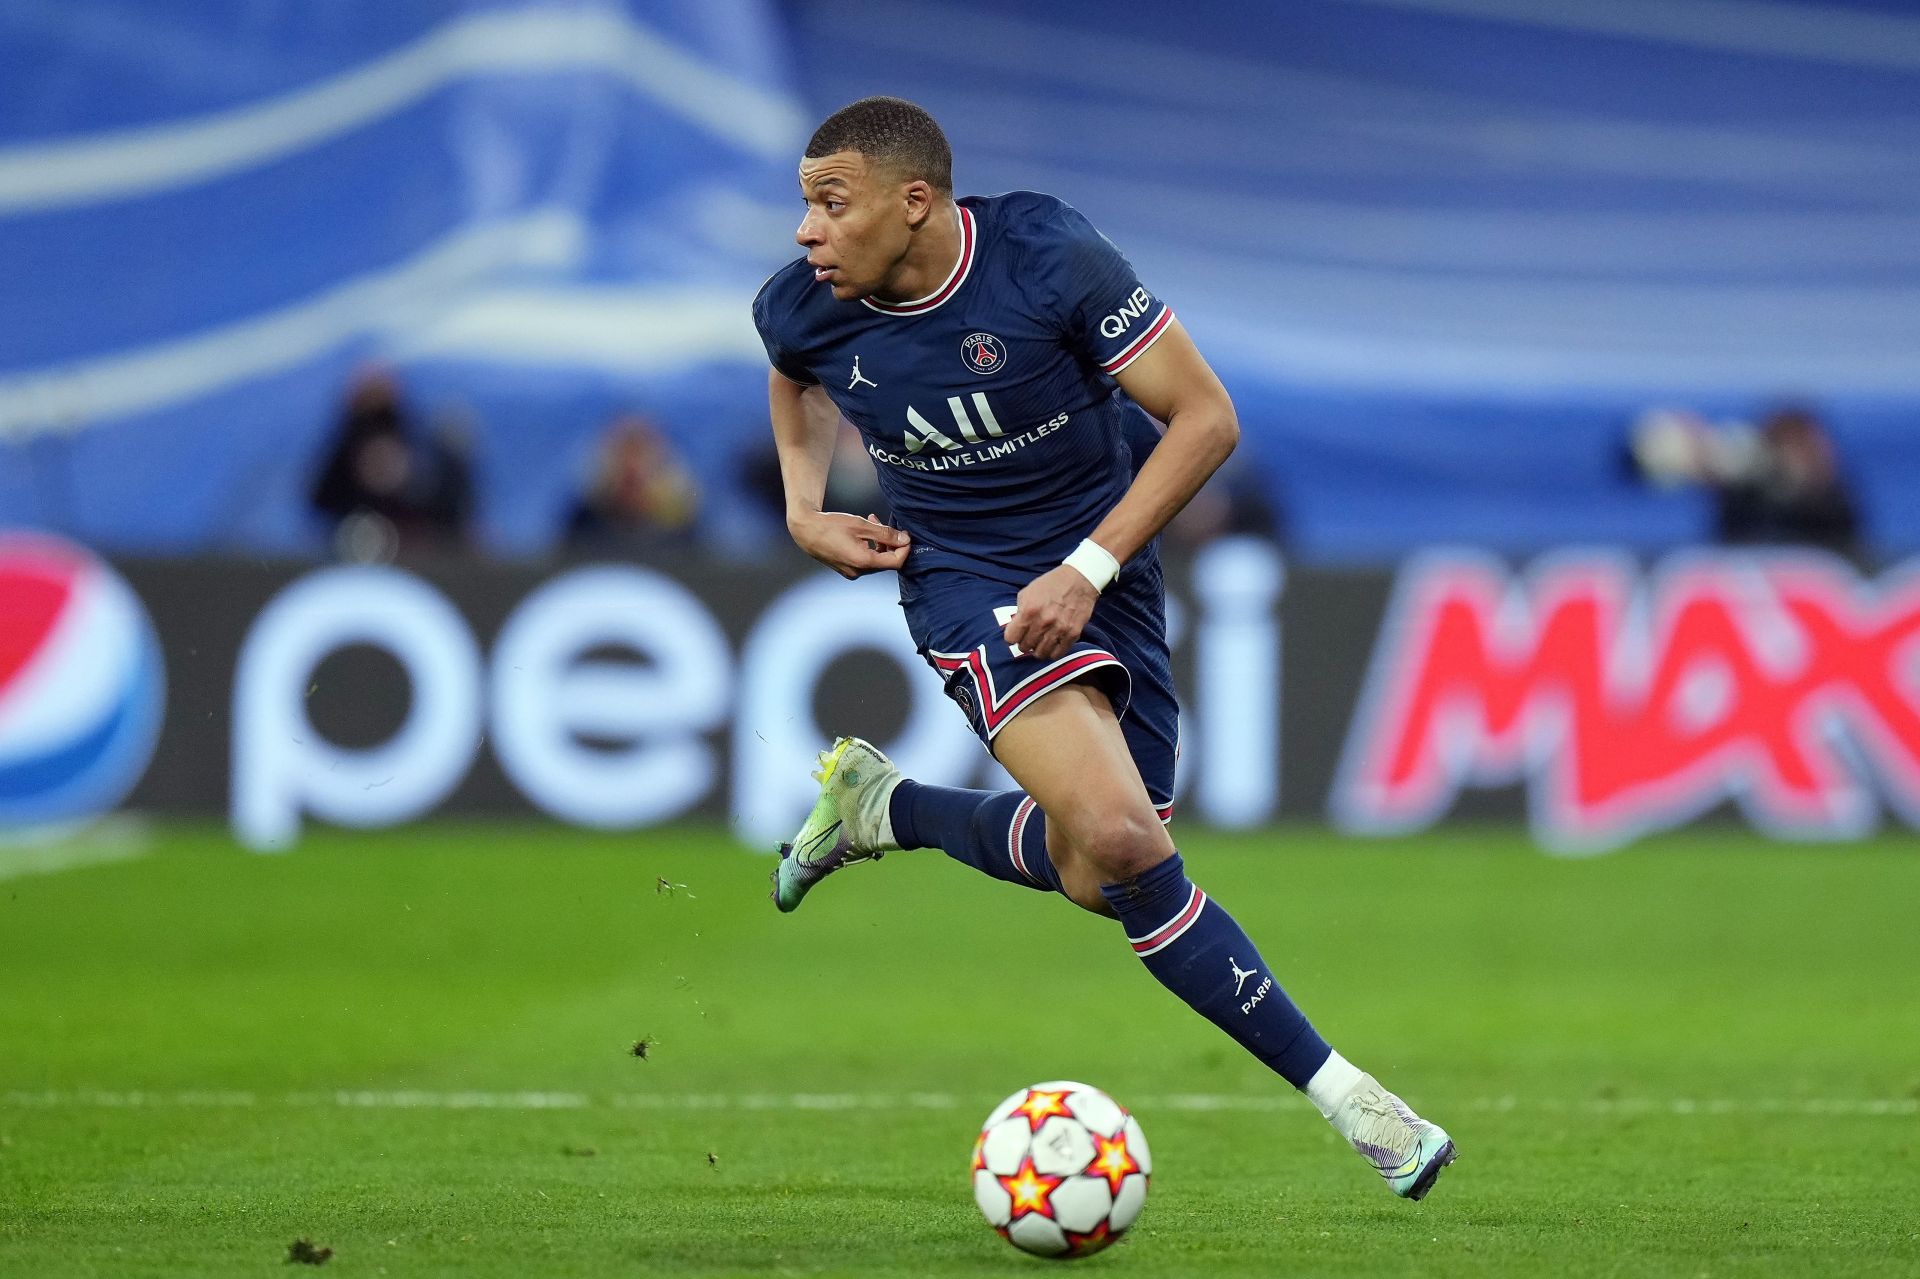 By far the best player at the Parc des Princes right now is Mbappe